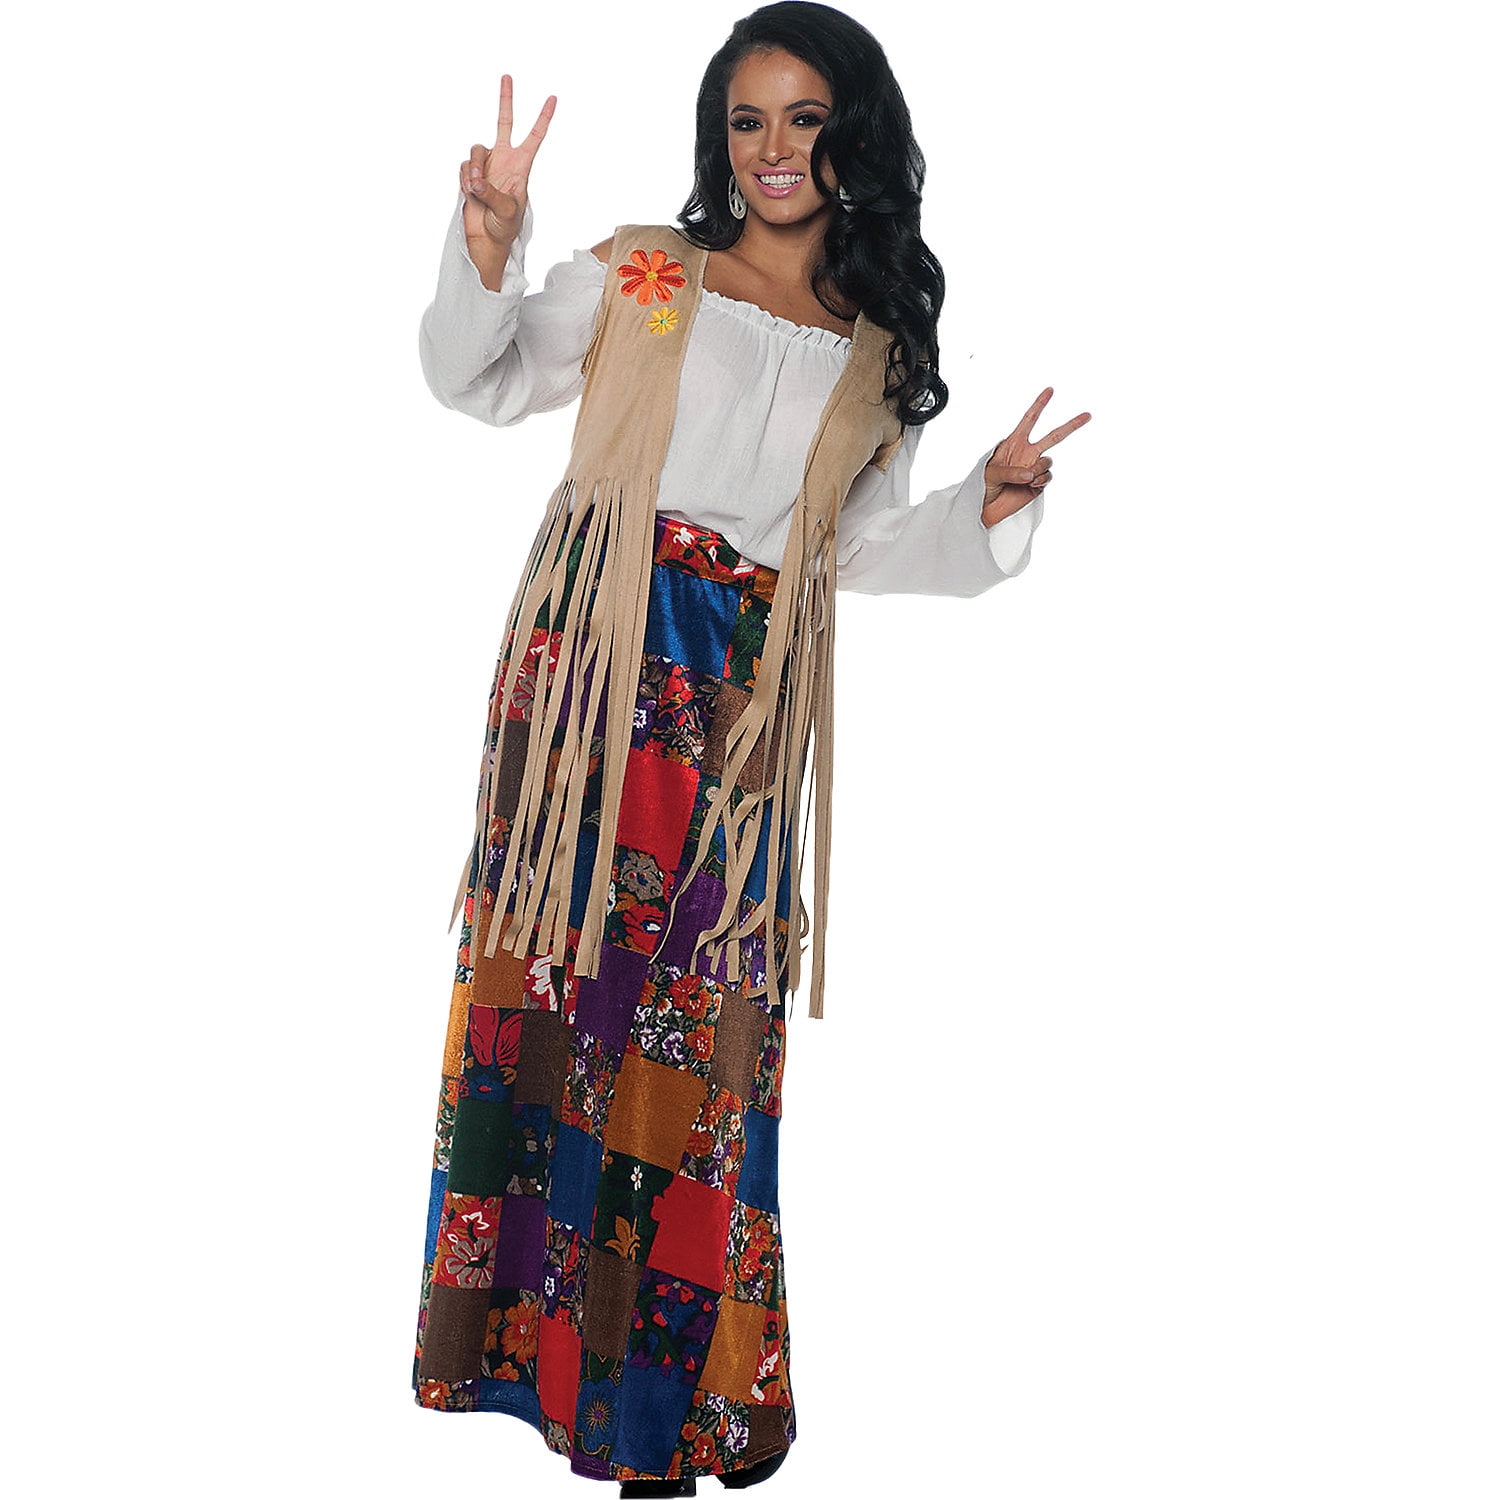 Underwraps Womens 60's Hippie Fringed Vest Costume - One Size Fits Most ...